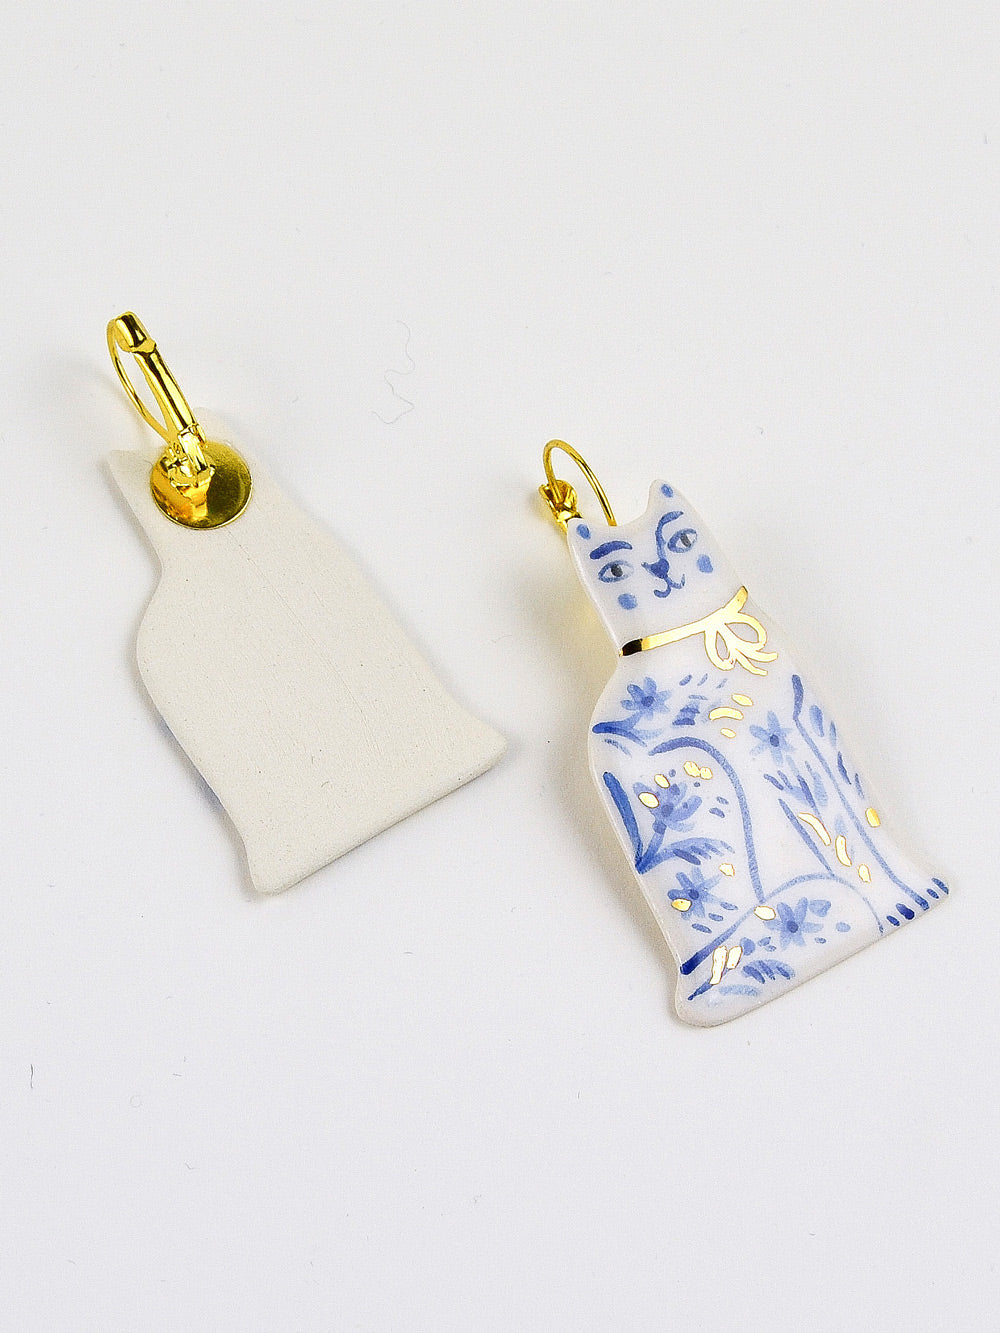 Ceramic Handpainted Cat Earrings with Flowers - Gold/Blue